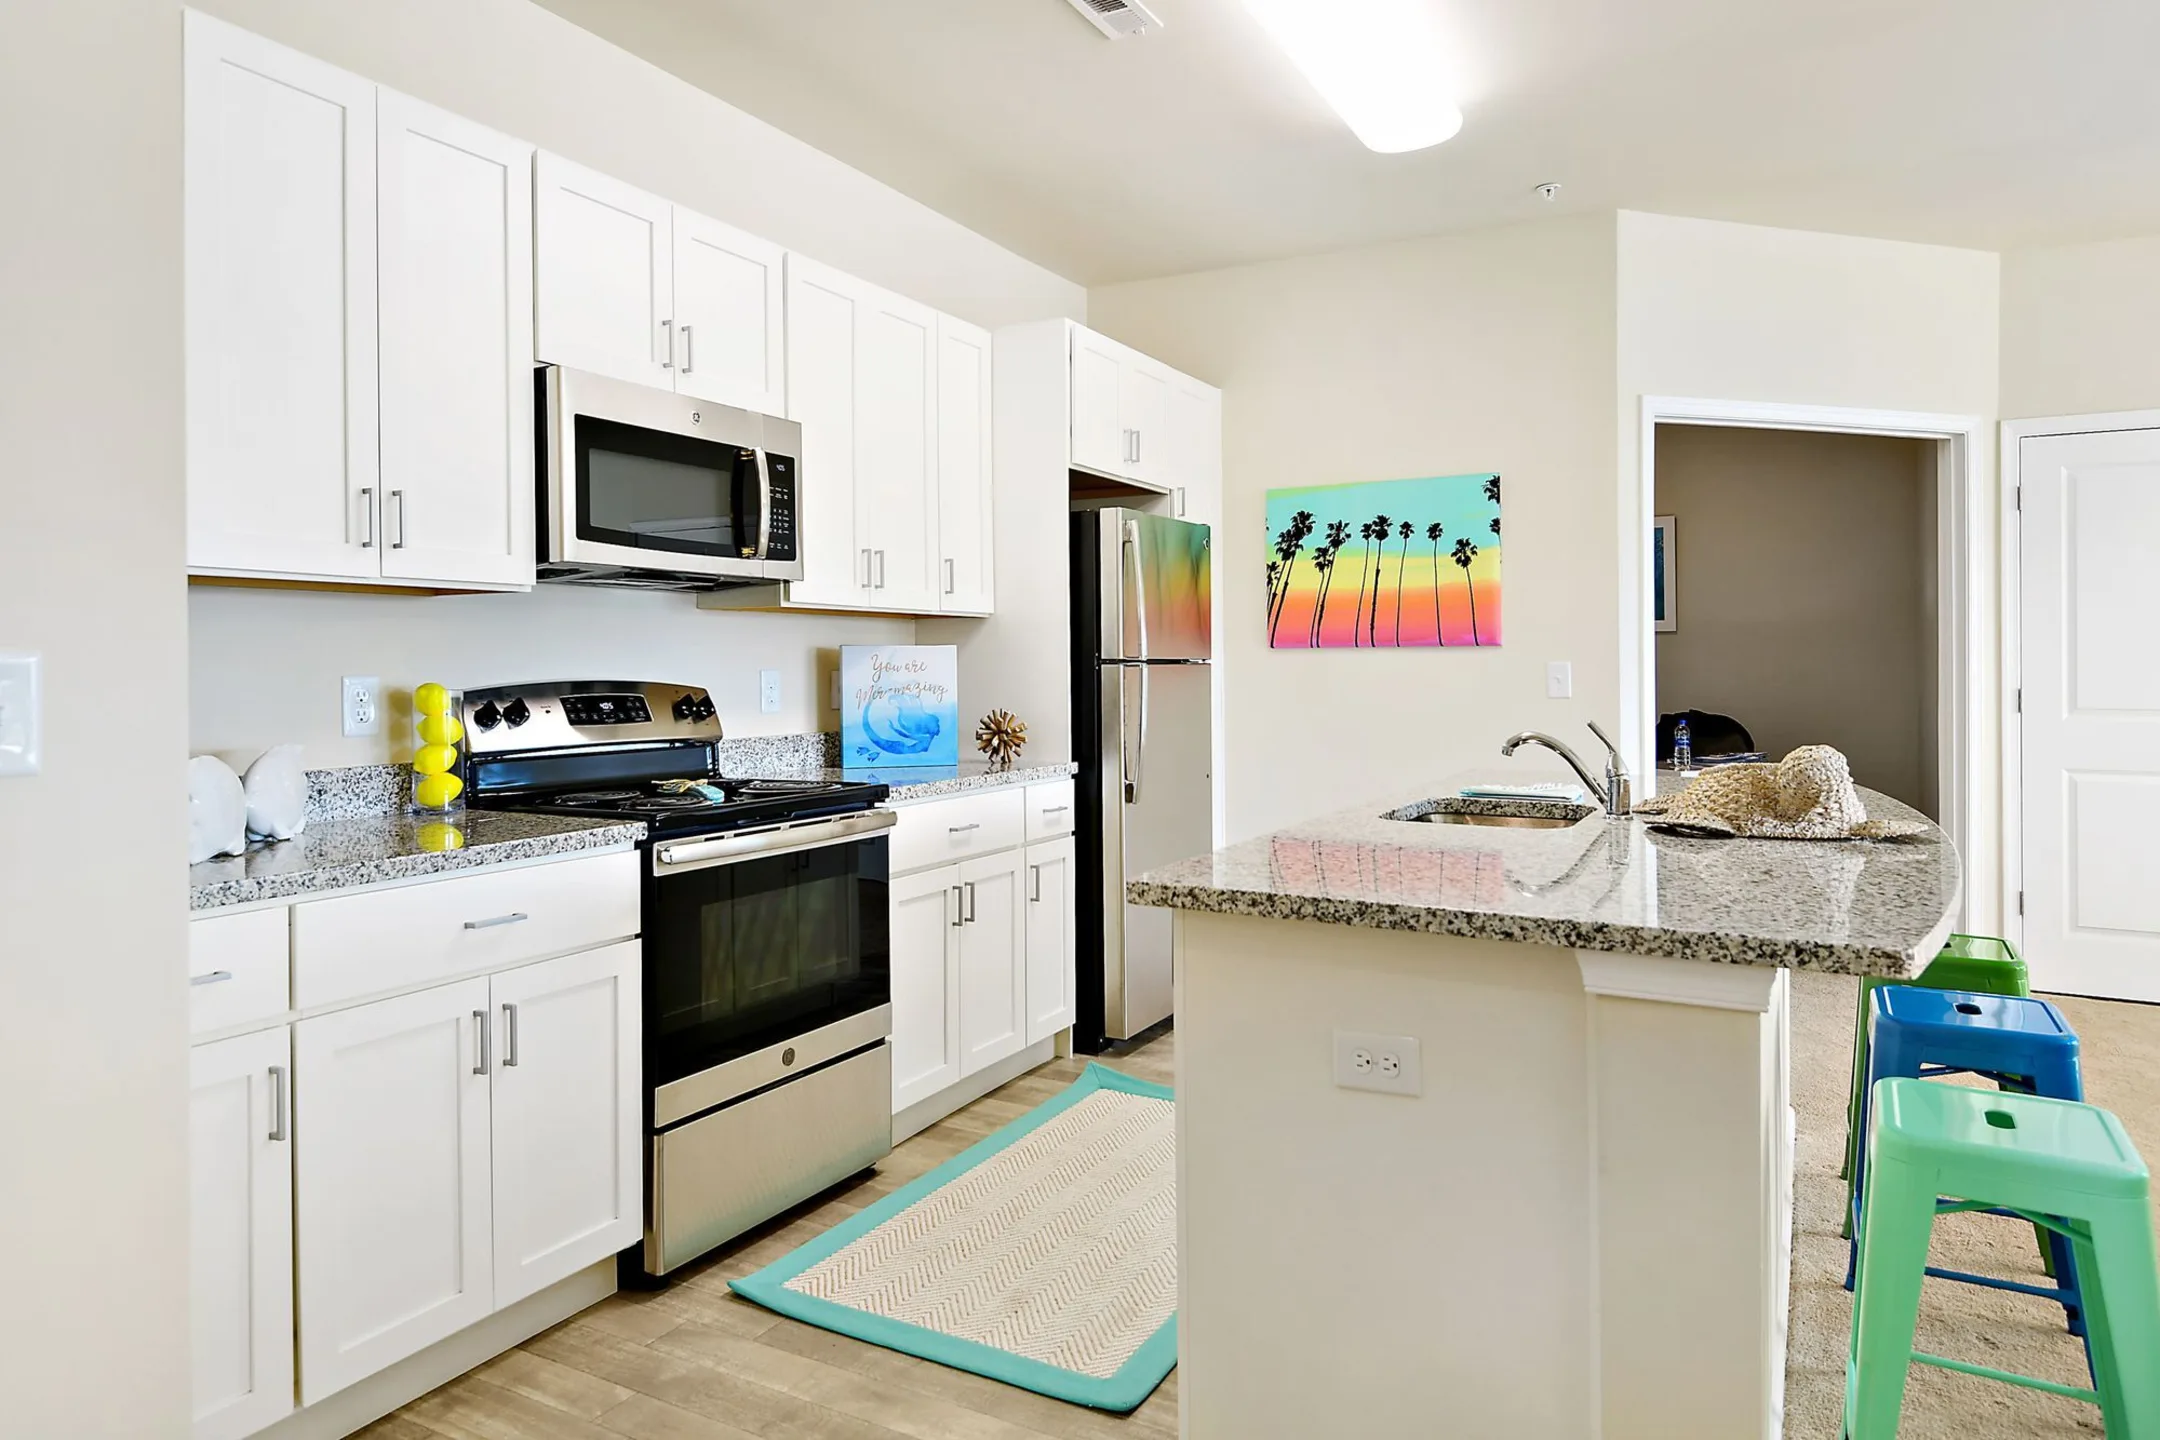 Kitchen - Oceans East Luxury Apartment Homes - Berlin, MD